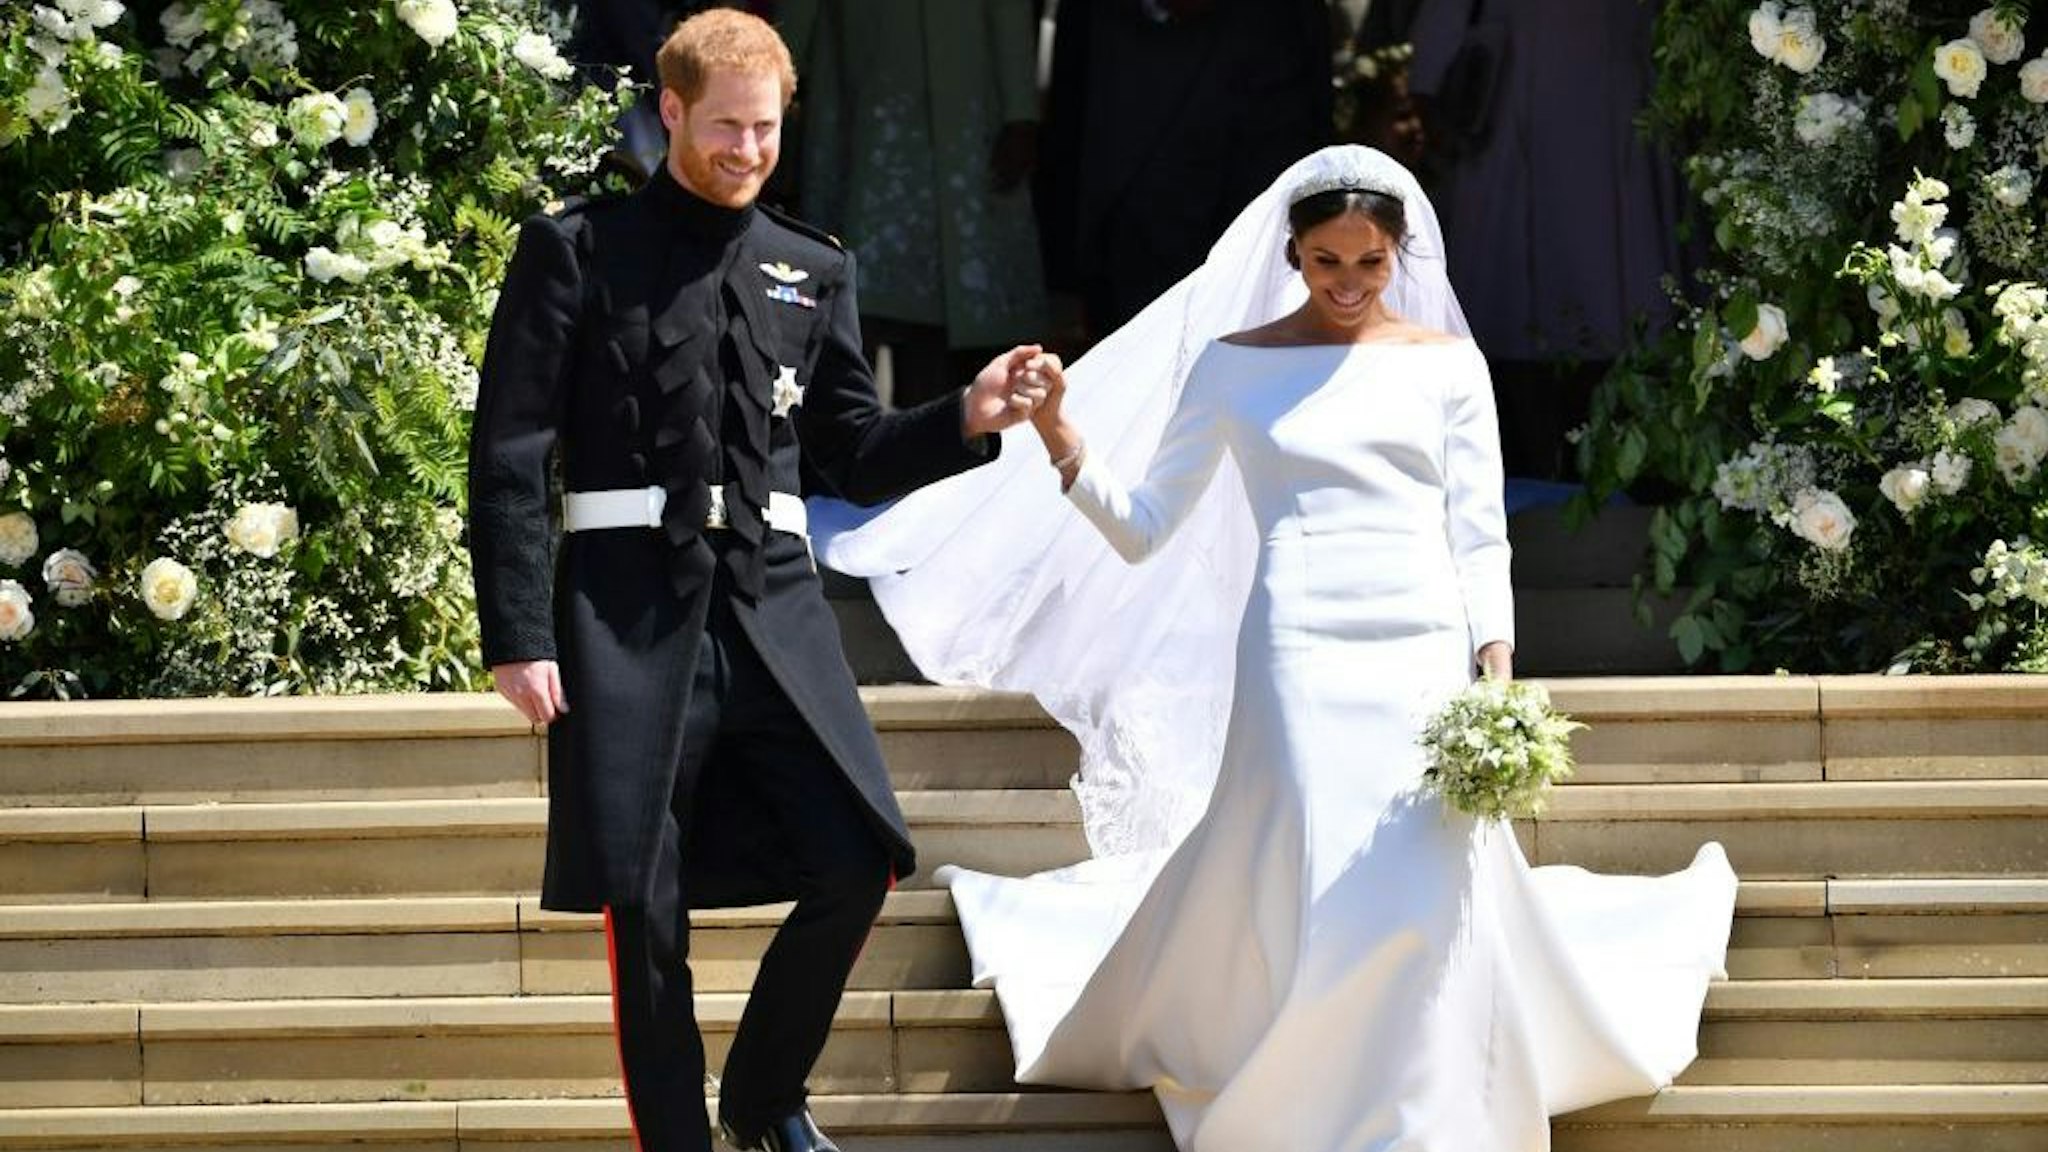 In this file photo taken on May 19, 2018, Britain's Prince Harry, Duke of Sussex and his wife Meghan, Duchess of Sussex emerge from the West Door of St George's Chapel, Windsor Castle, in Windsor, after their wedding ceremony. (Photo by BEN STANSALL/AFP via Getty Images)